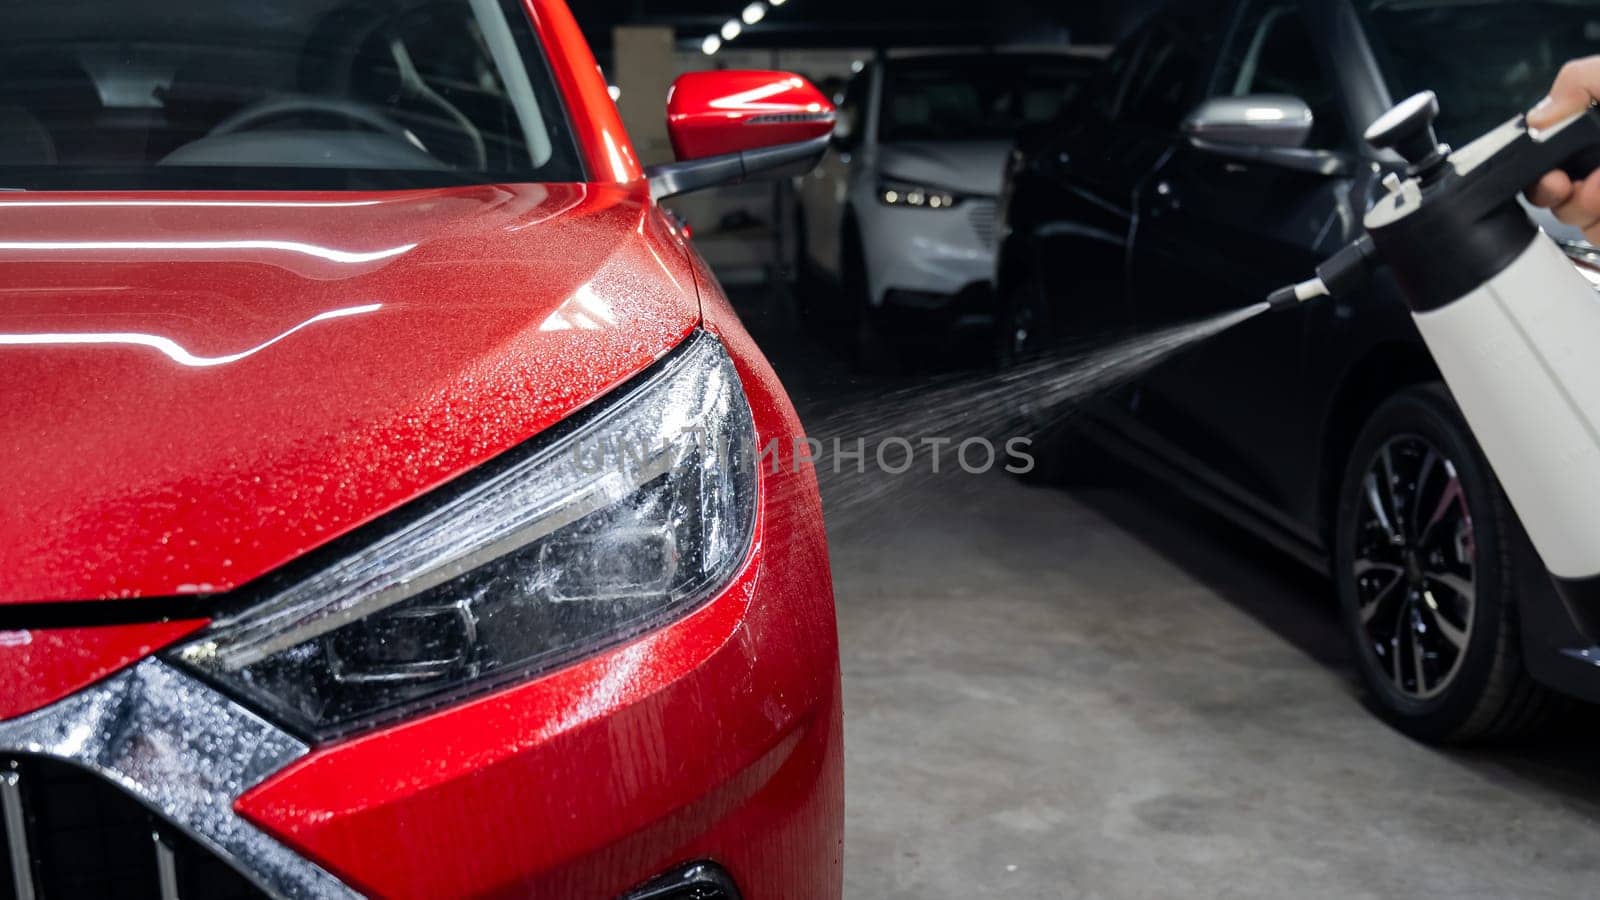 A man washes the headlights of a red car with a spray